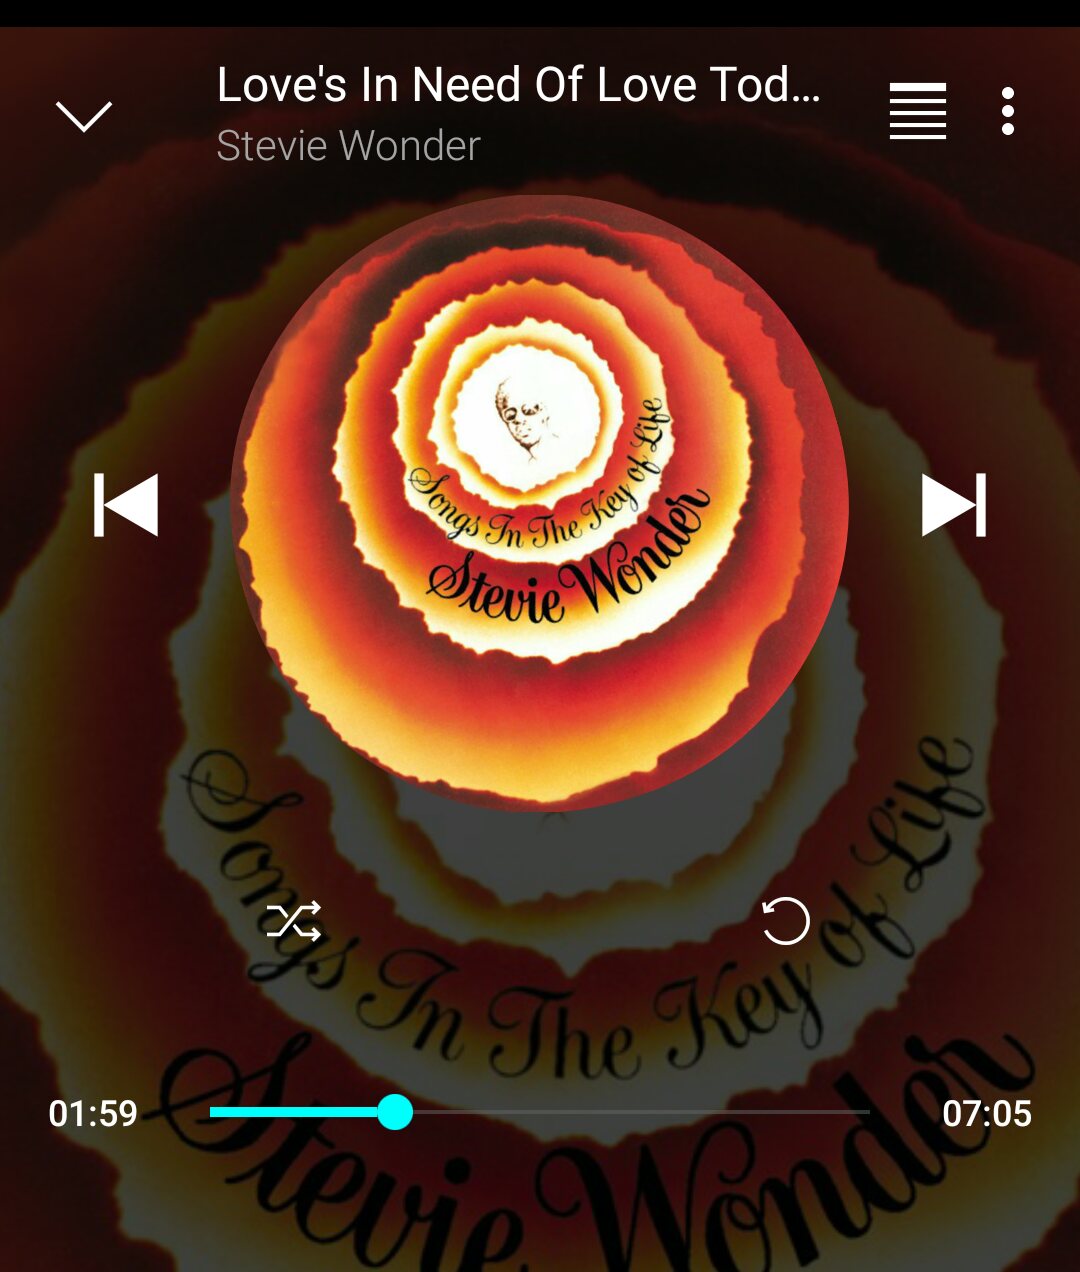  Love\s in need...of love today. Don\t delay...send yours in right away. Happy birthday, Mr. Stevie Wonder. 